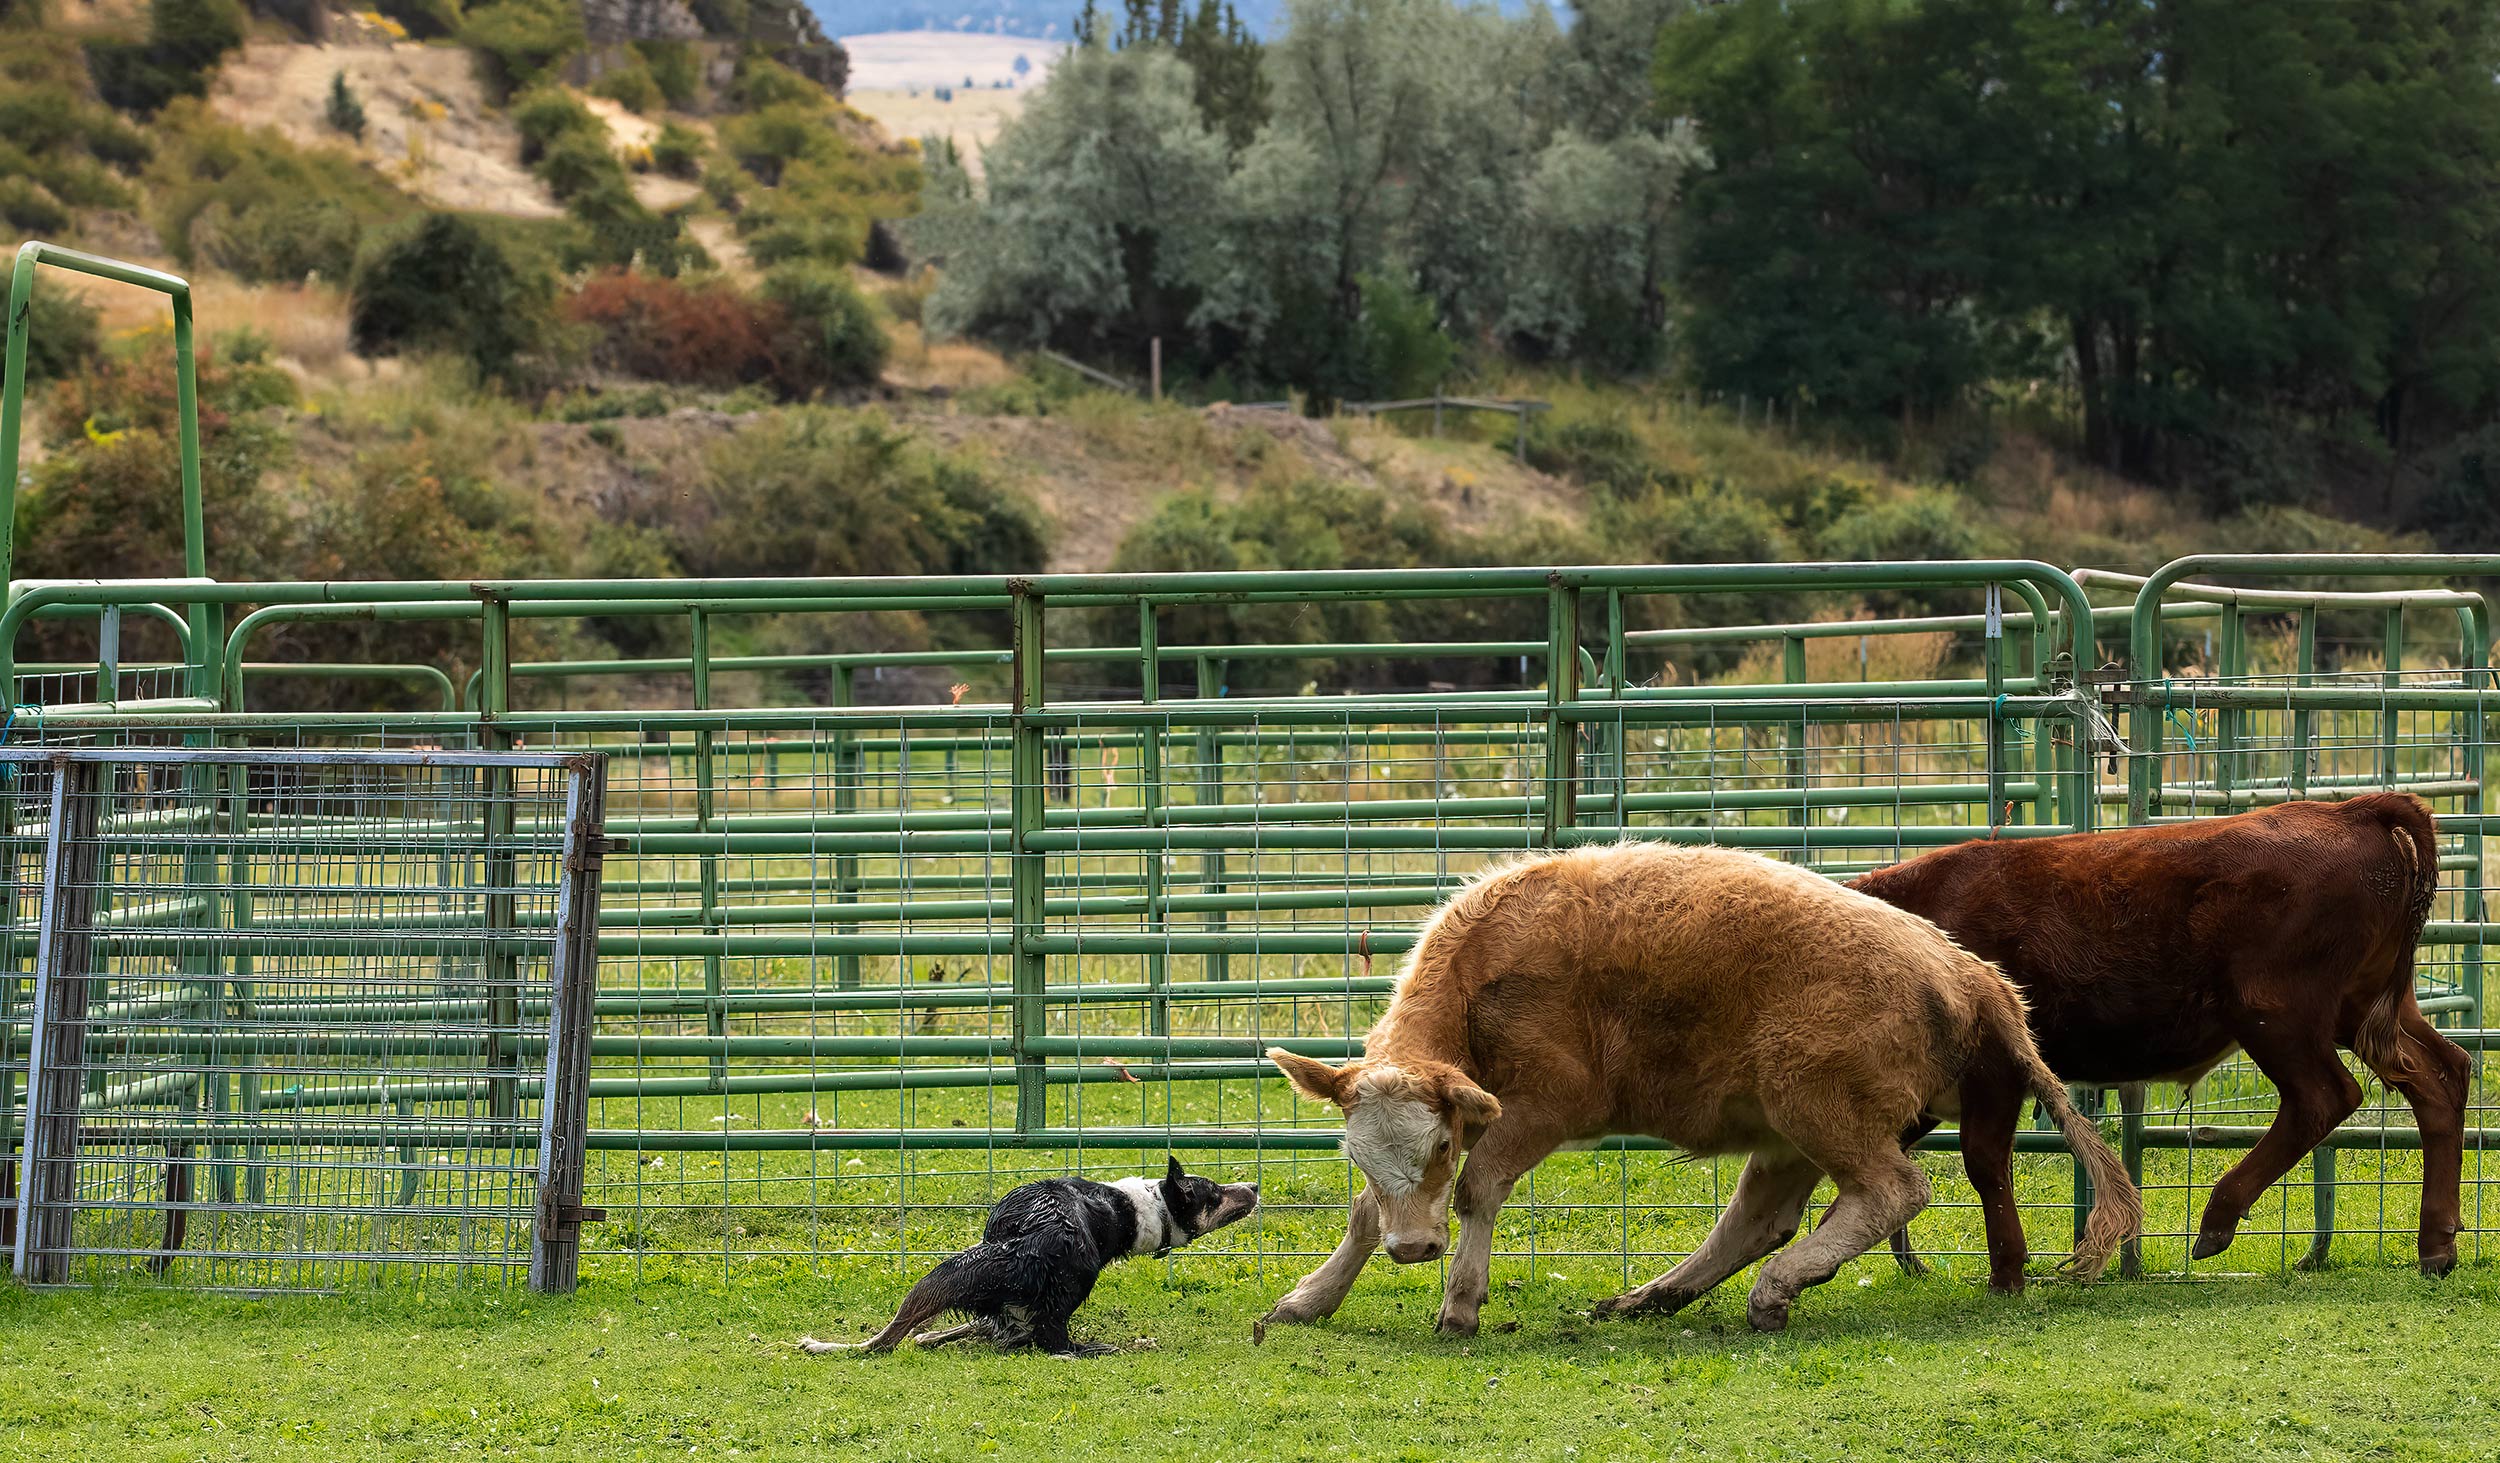 Border collie dogs working cattle. Livestock and agriculture photography